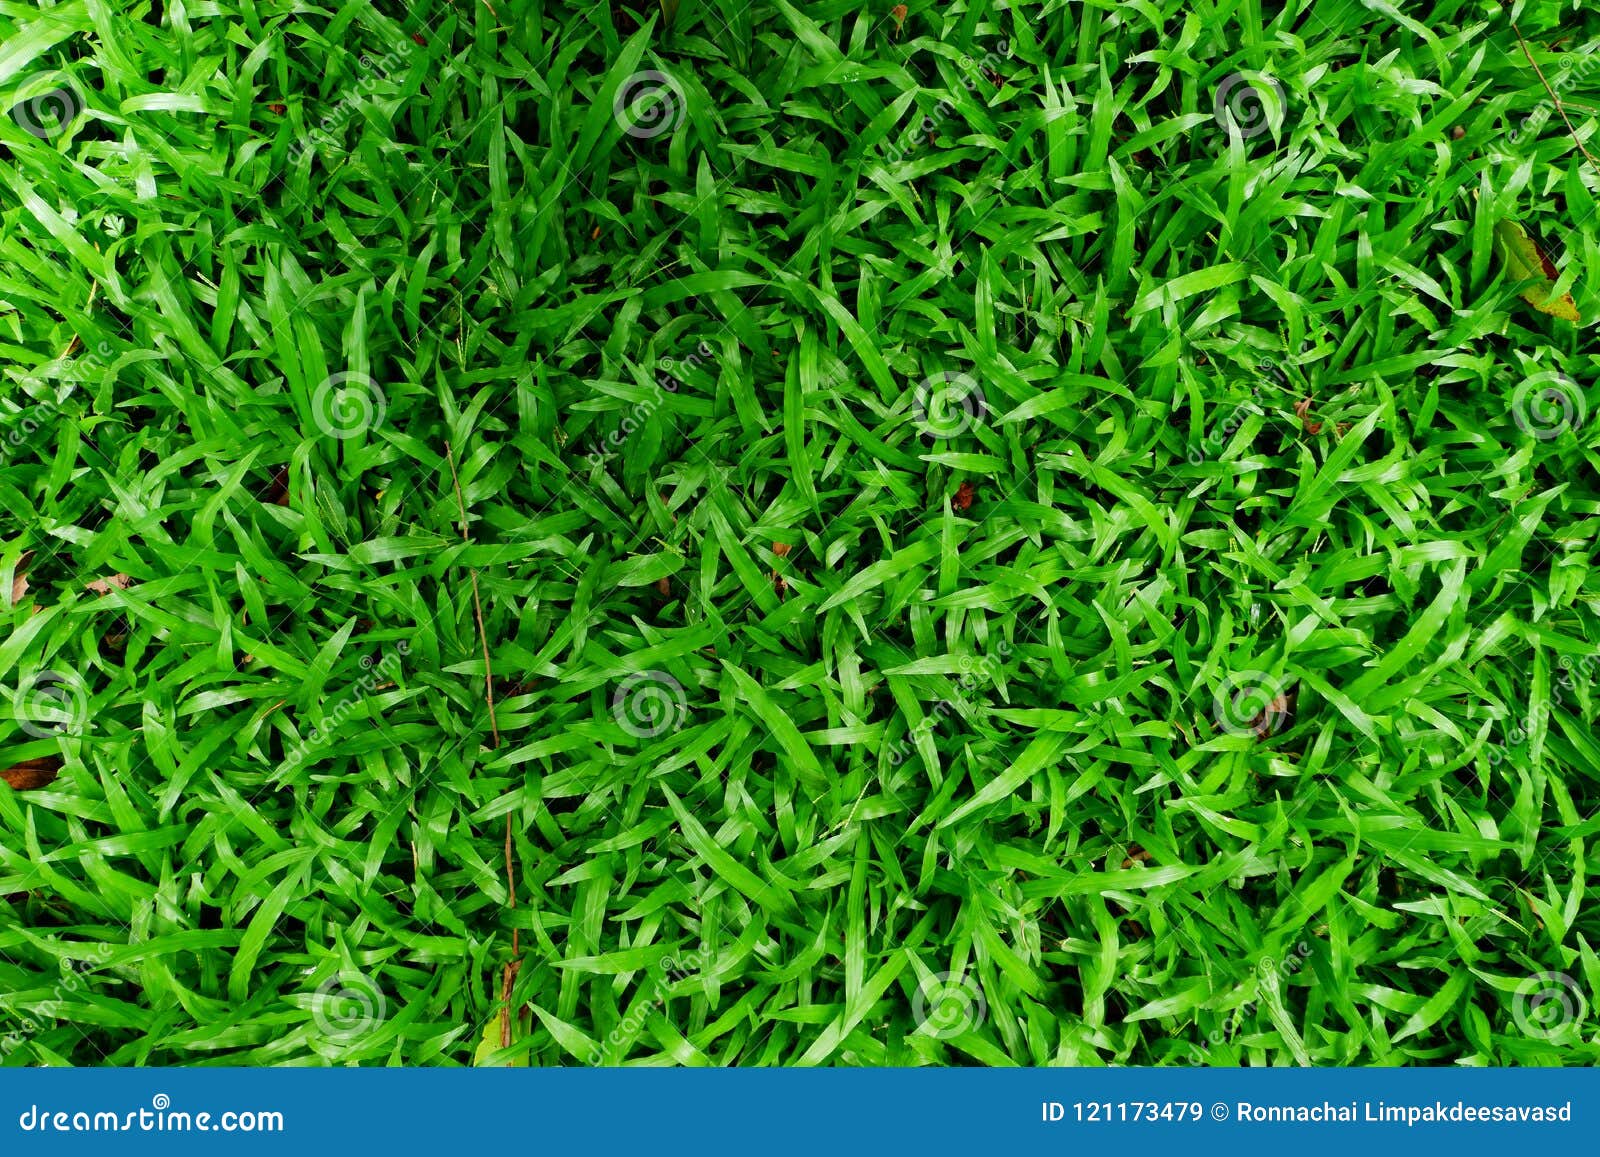 High Resolution Image of Green Grass Background Stock Image - Image of